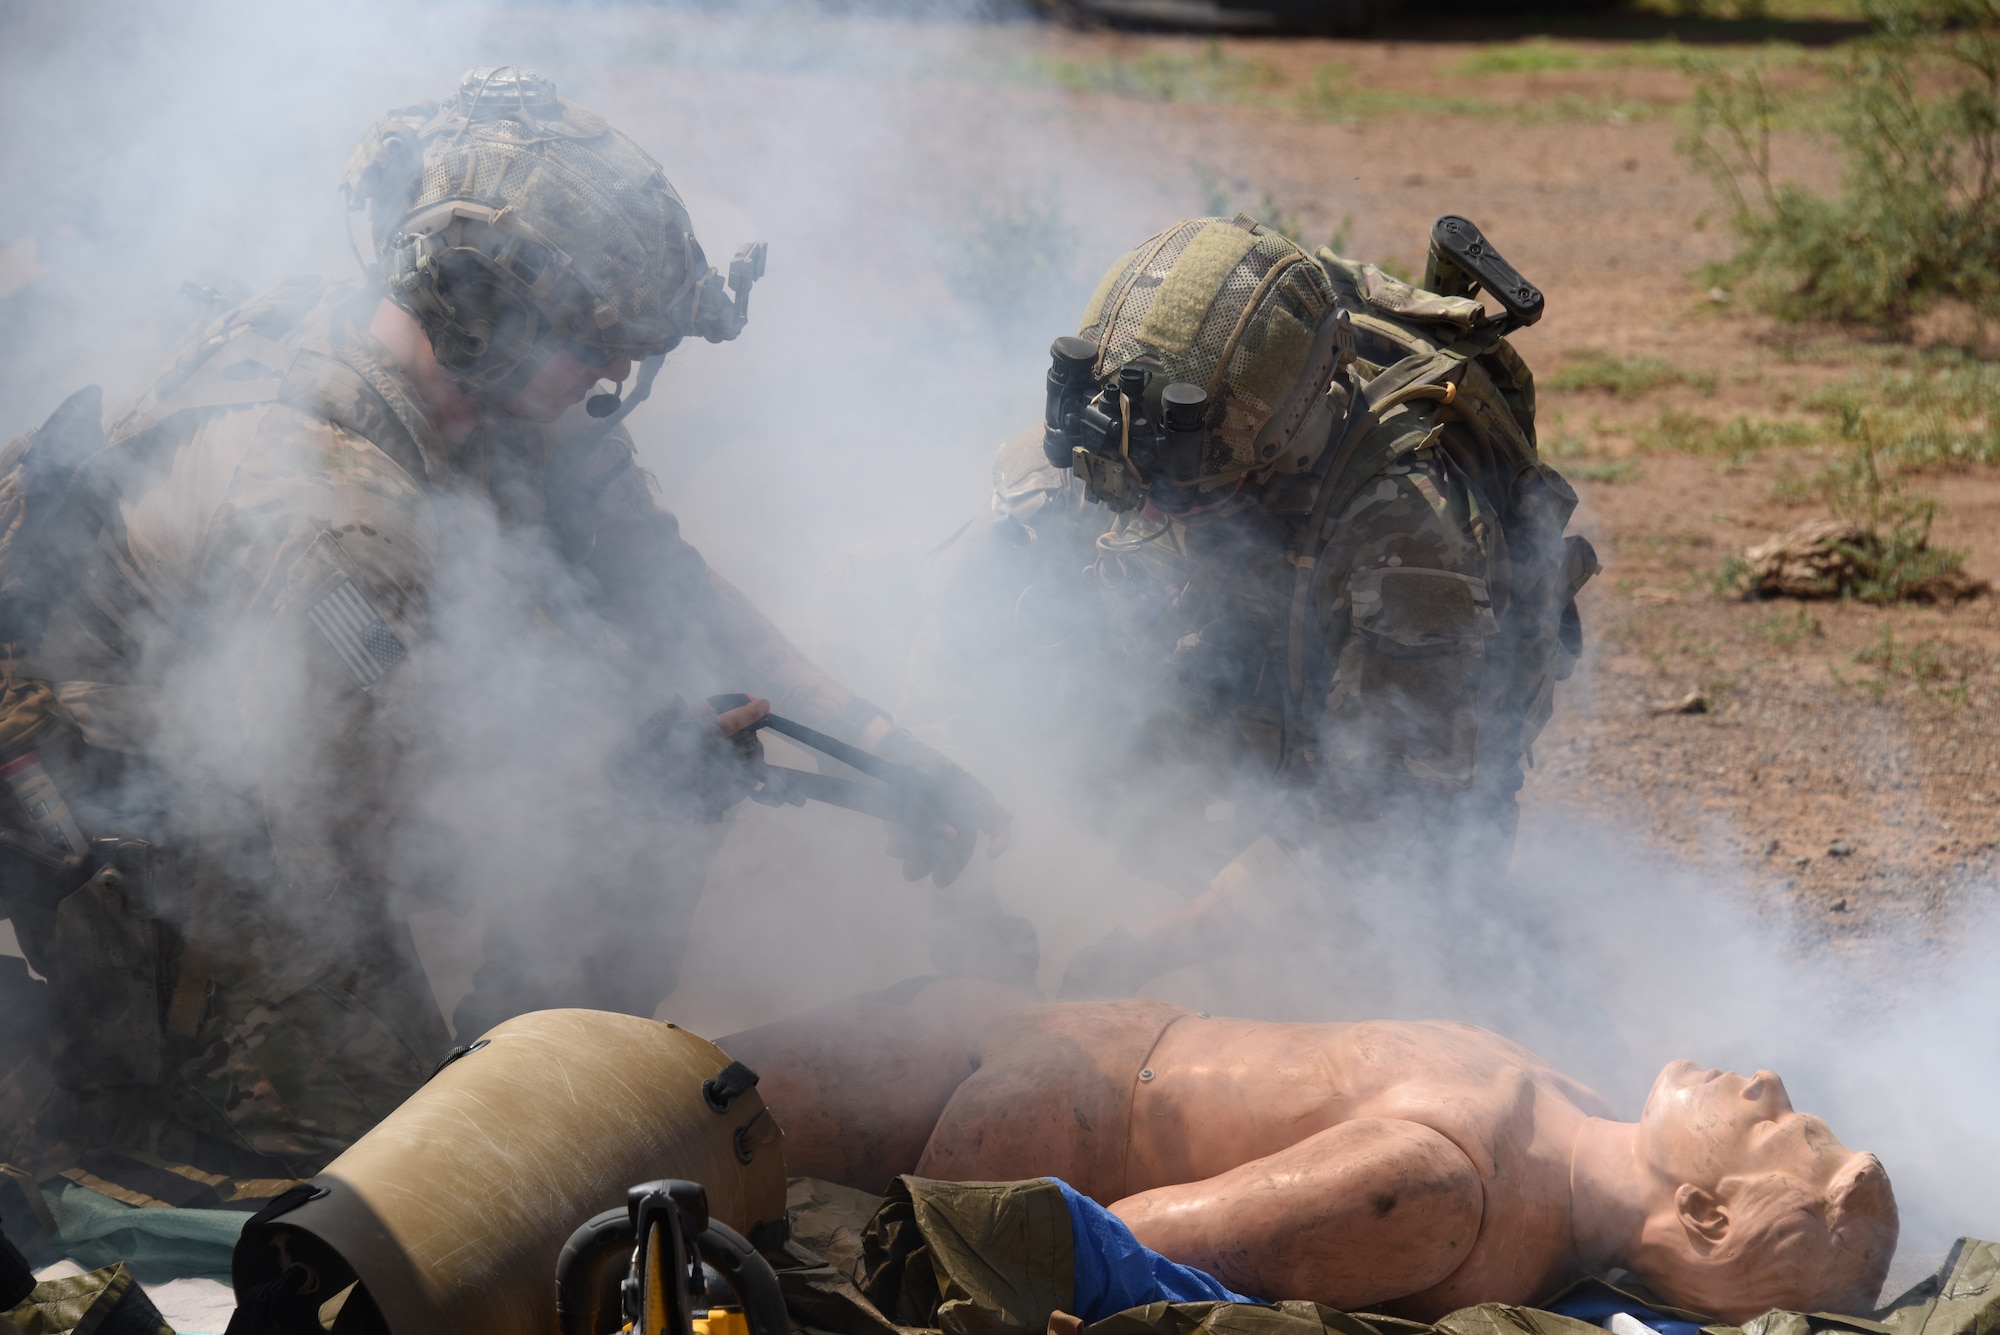 A photo of pararescuemen operating on a simulated injured victim.